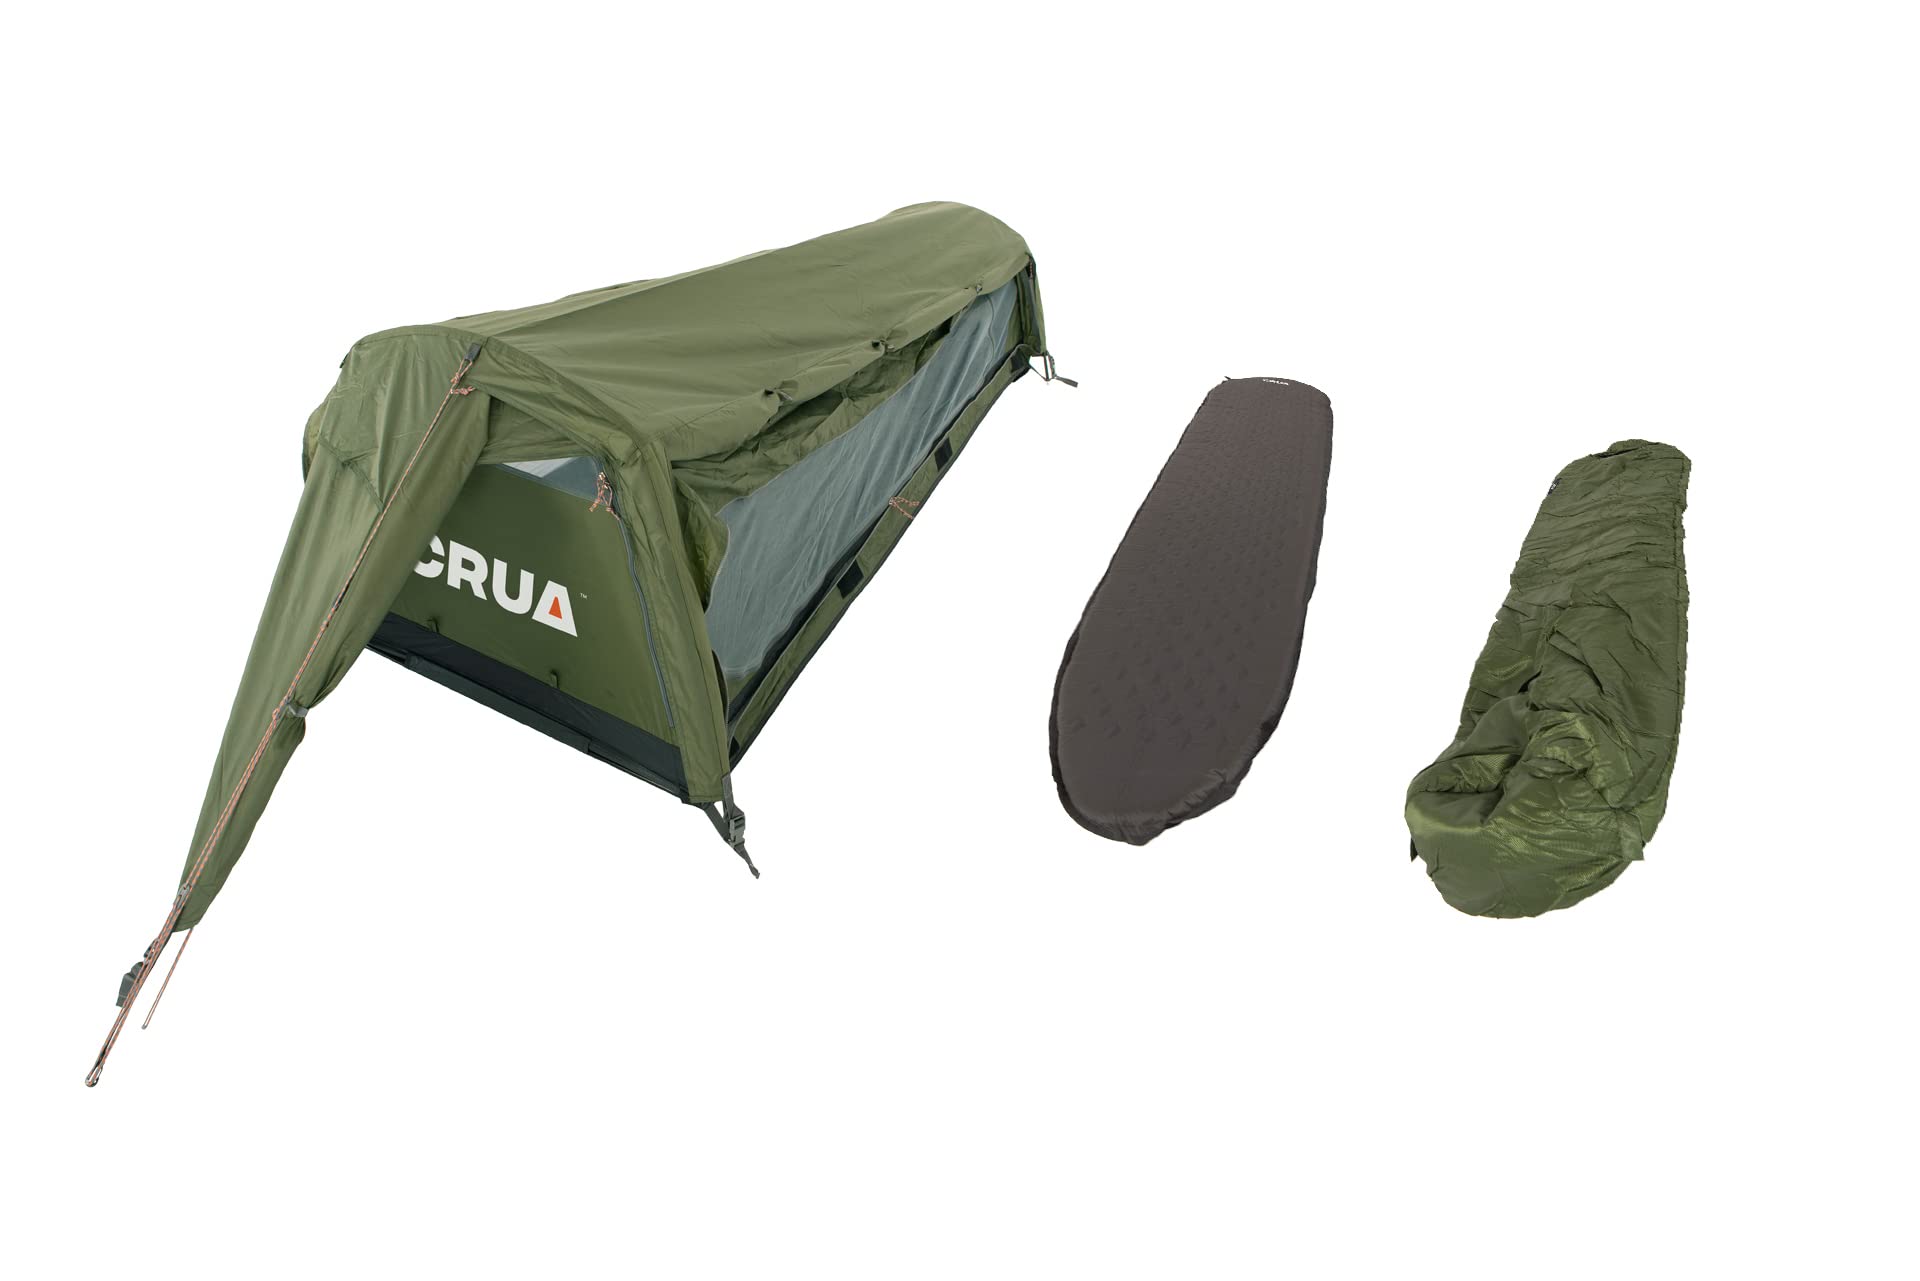 Crua Hybrid Set - 1 Person Camping Tent Including Self-Inflating Mattress, Sleeping Bag - Ground Tent or Hammock,Hiking,Backpacking